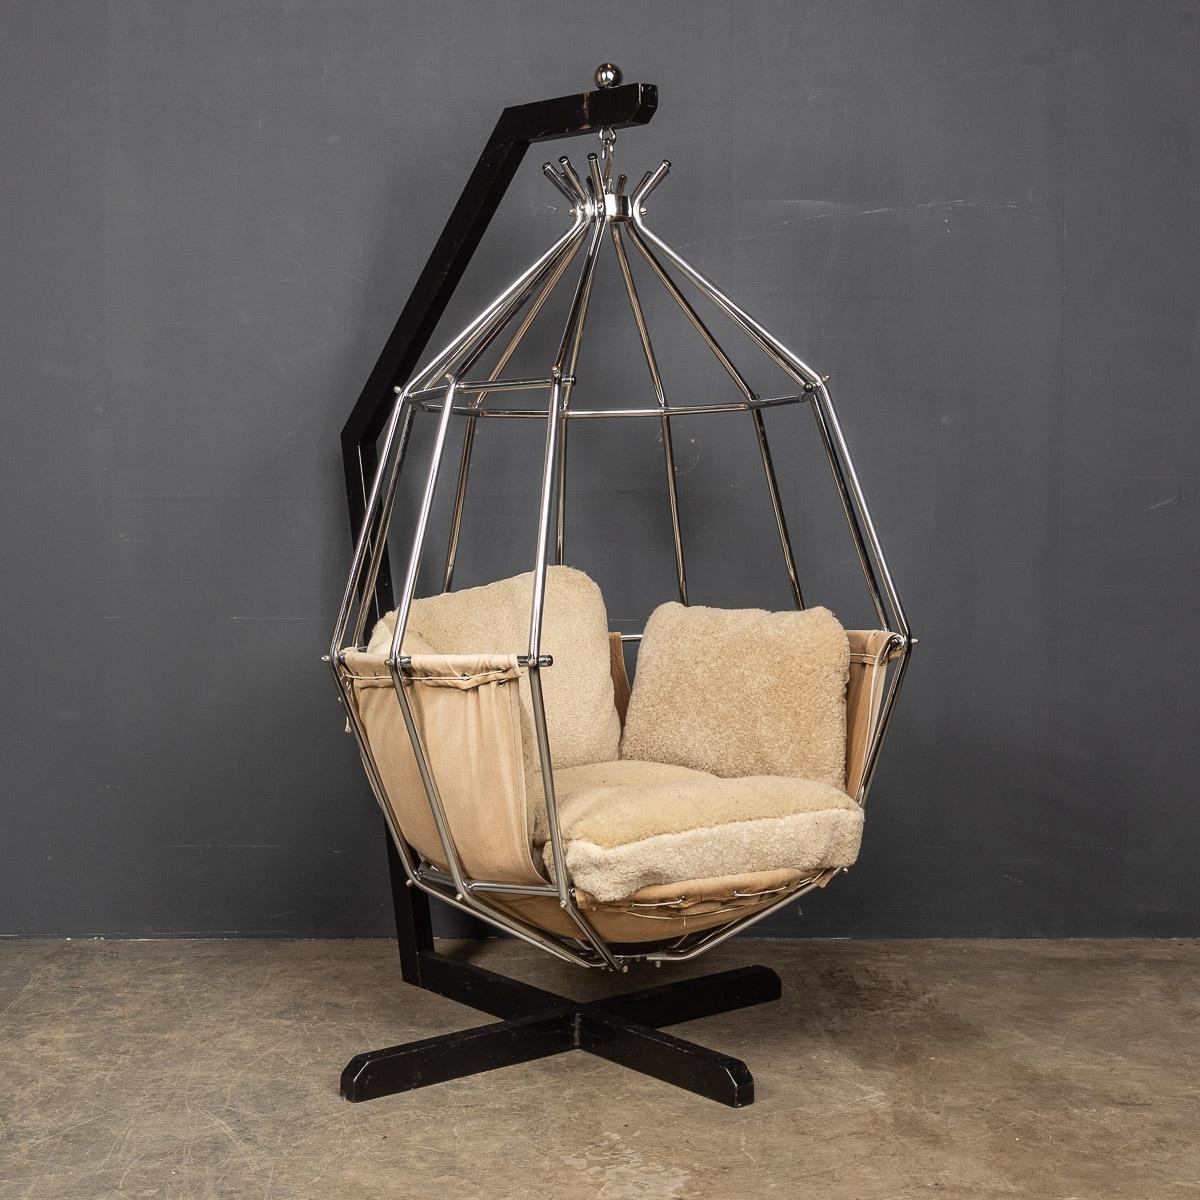 Elegant Parrot Cage Chair by Ib Arberg, c.1970 In Good Condition For Sale In Royal Tunbridge Wells, Kent